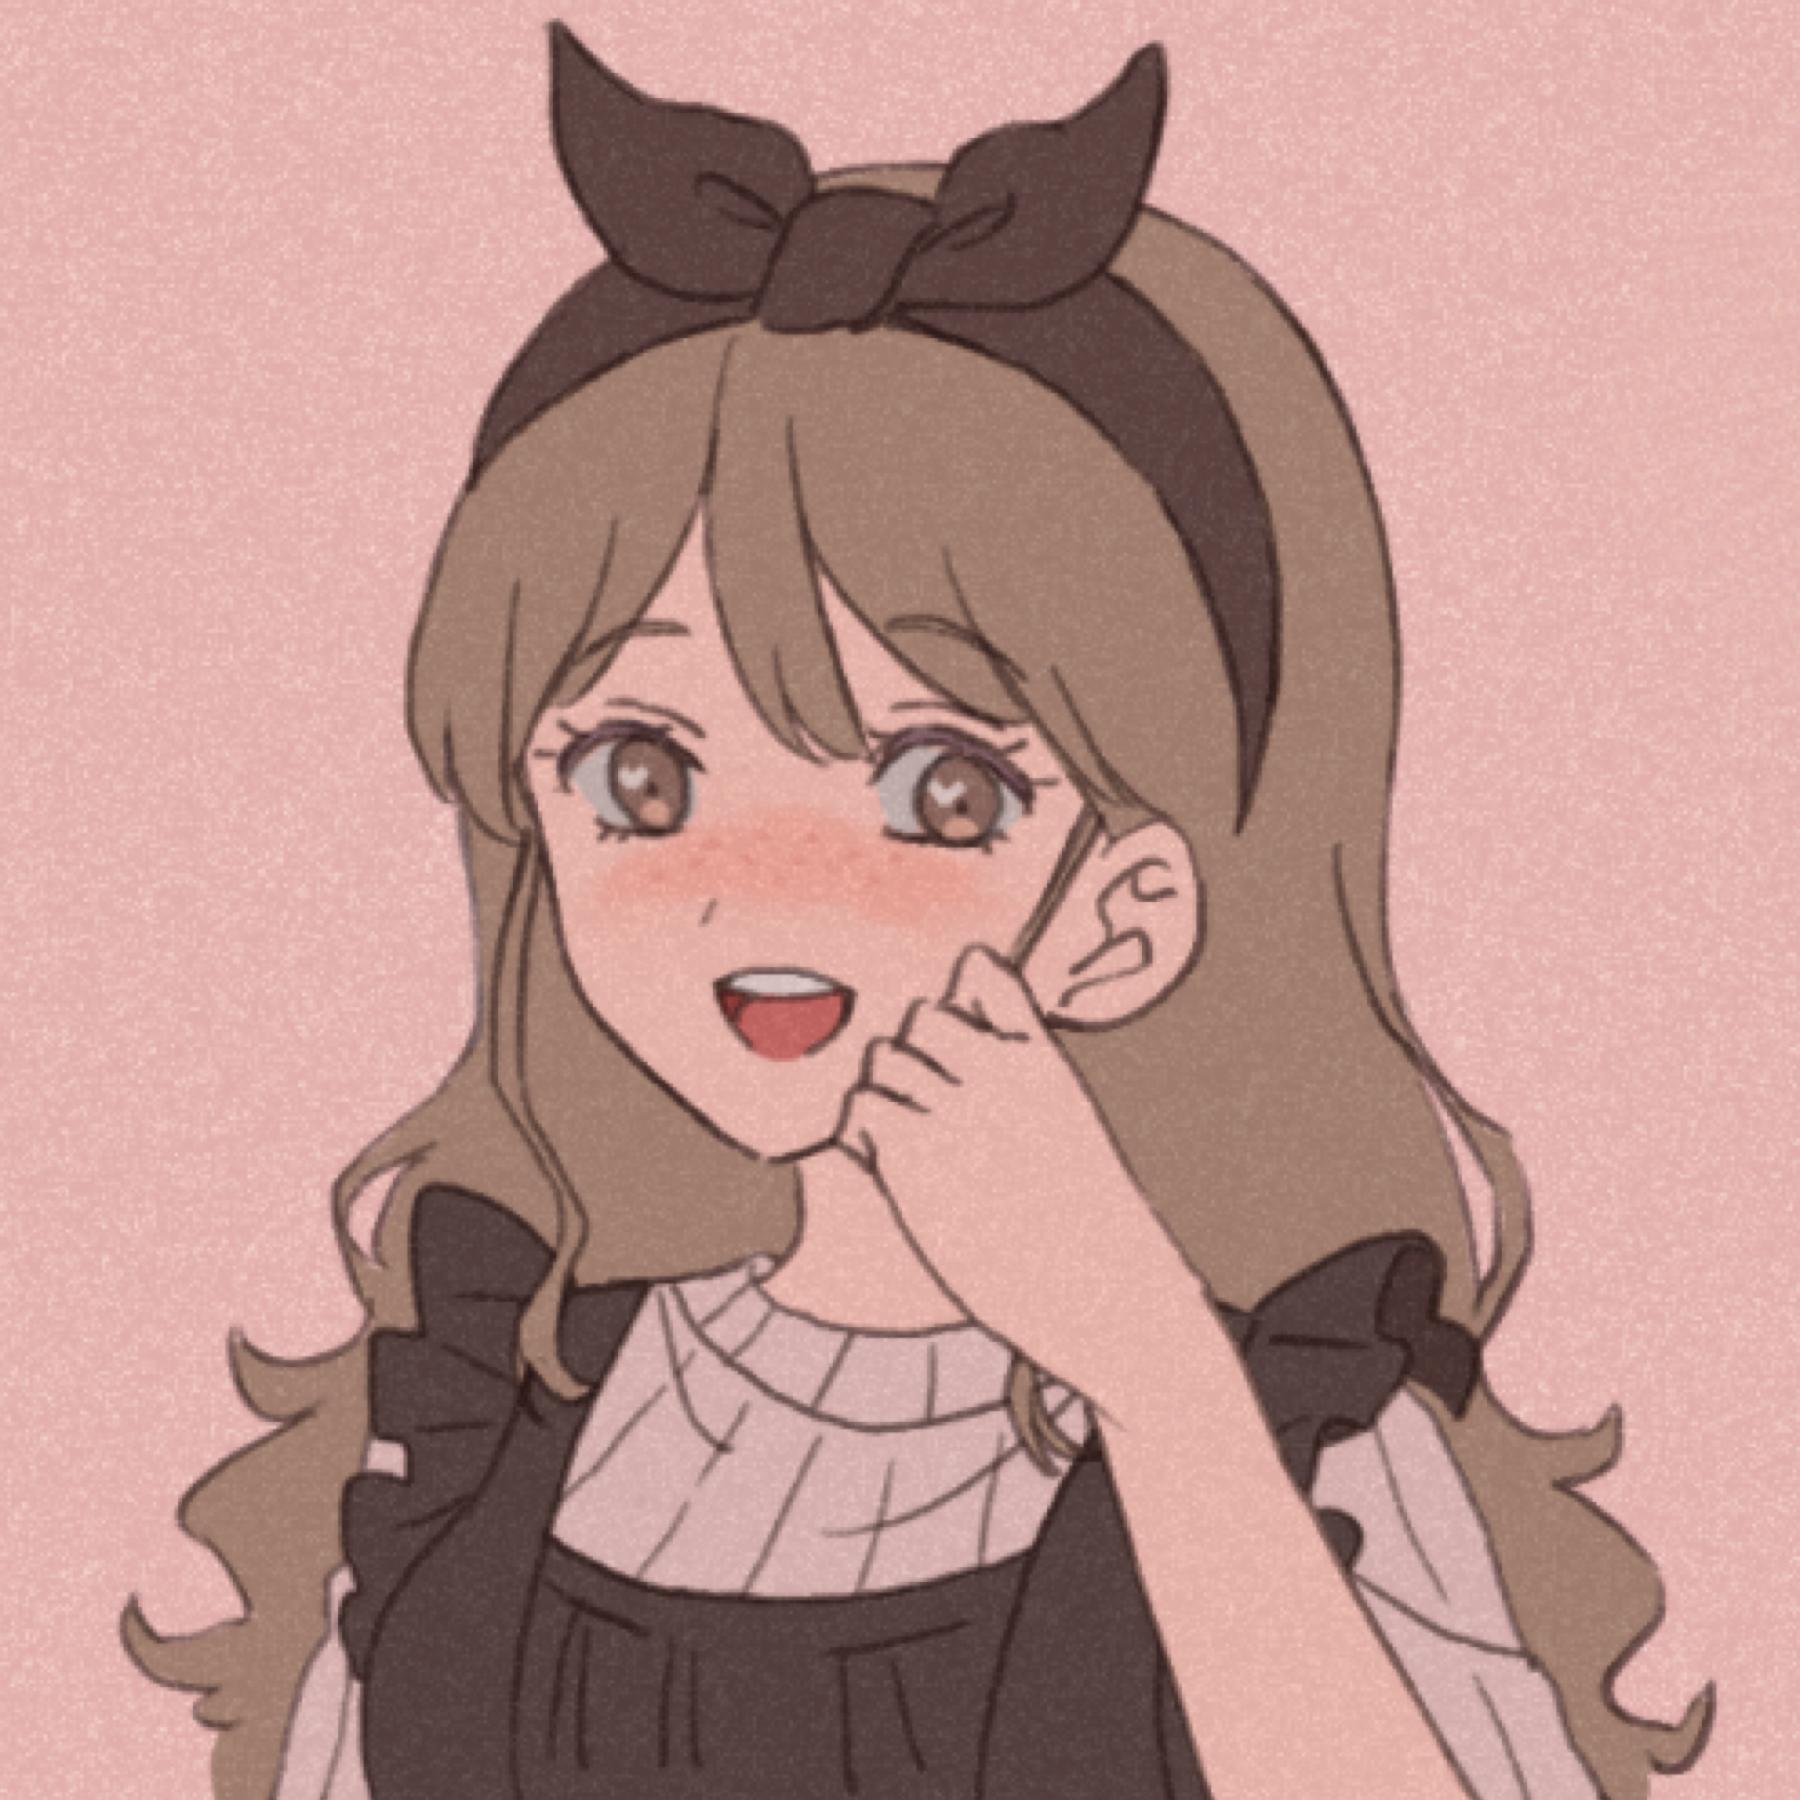 picrew has no right to be this cute